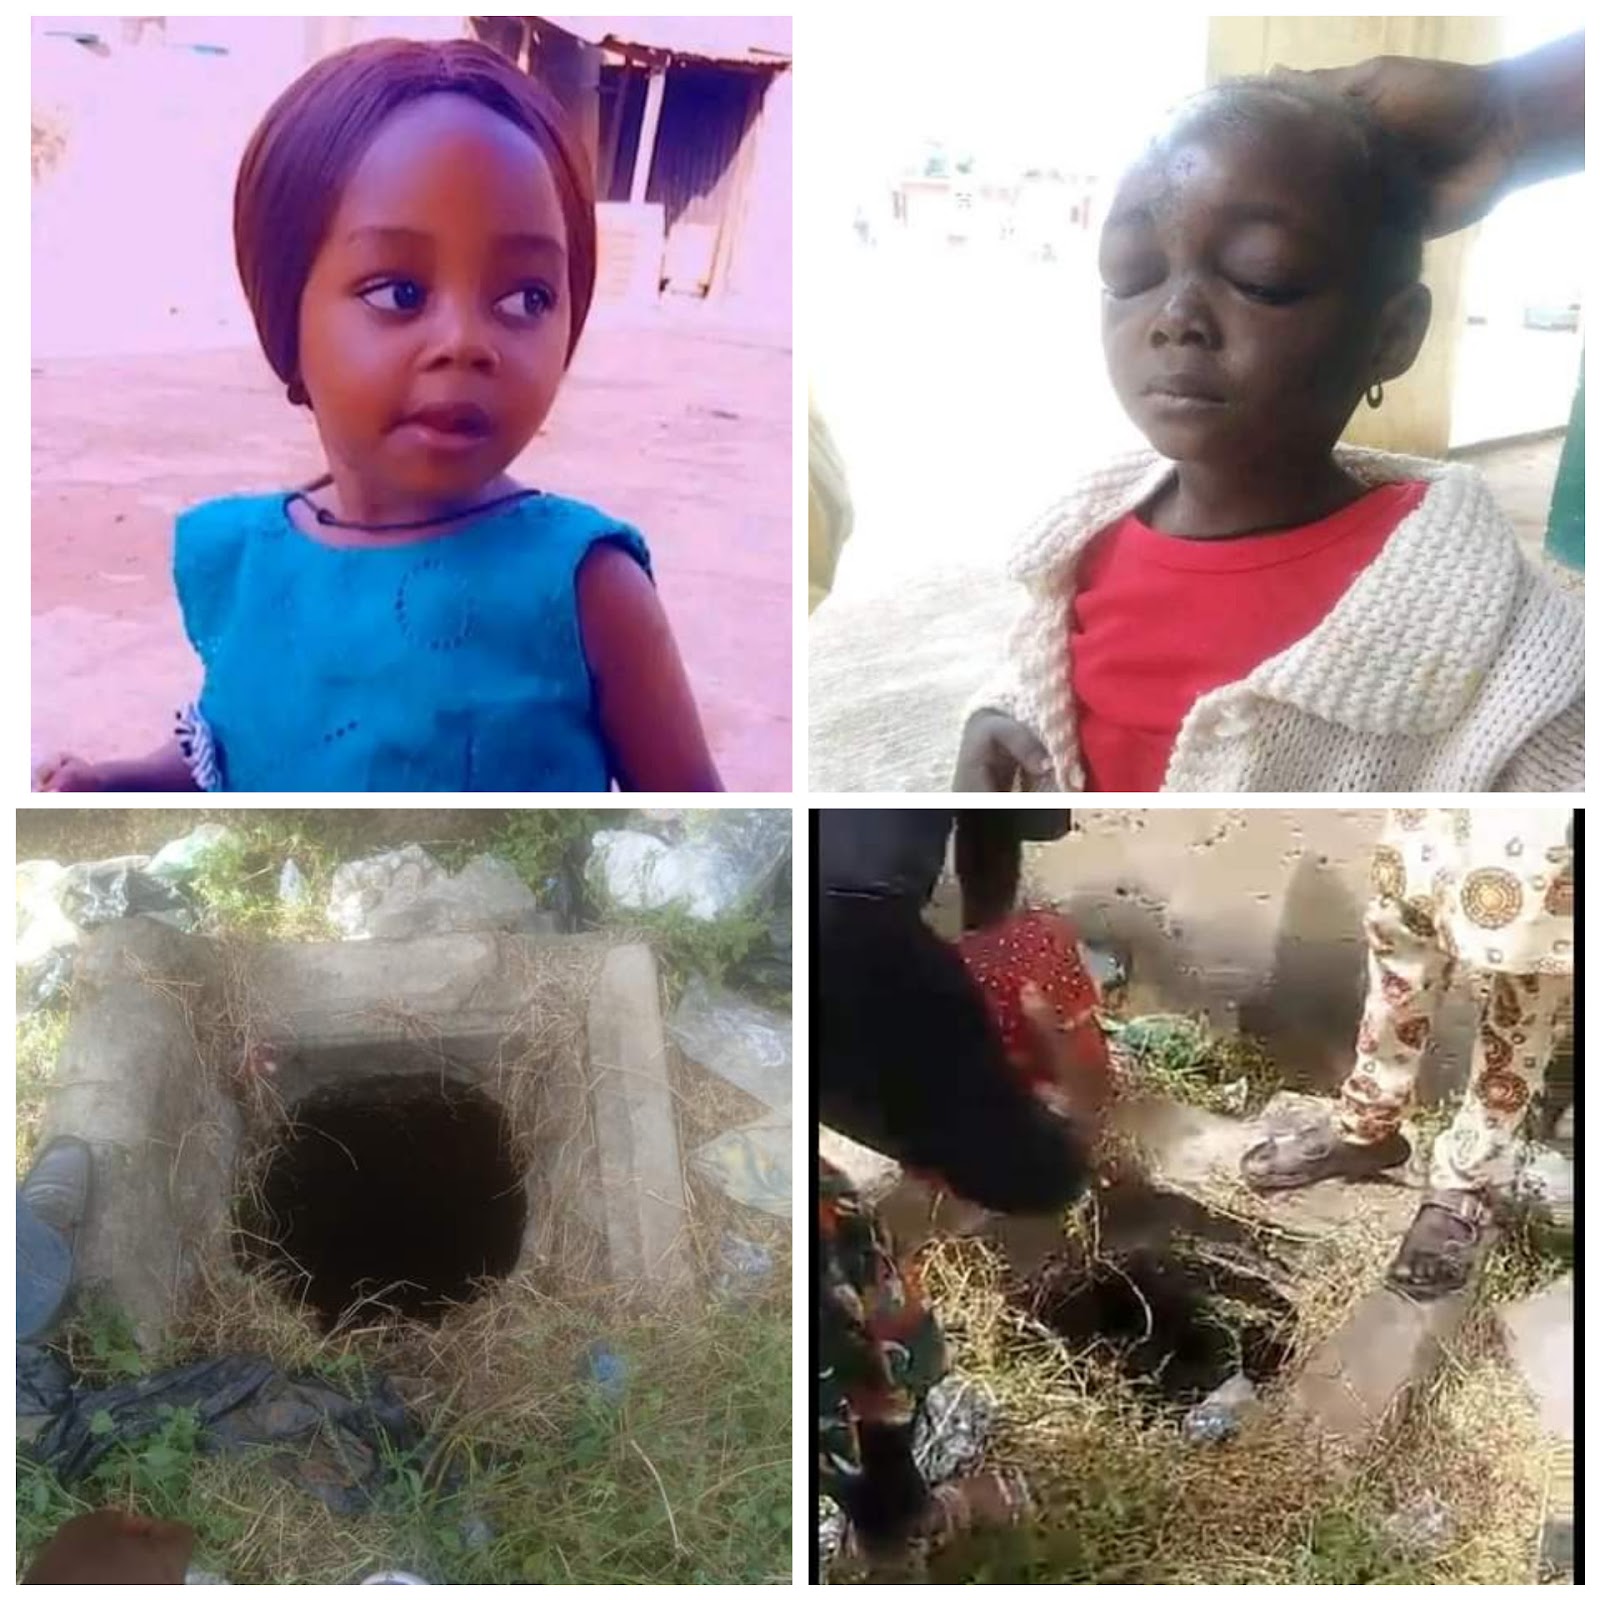 Three-year-old Girl Found in Abandoned Well 3 Days After Going Missing 1